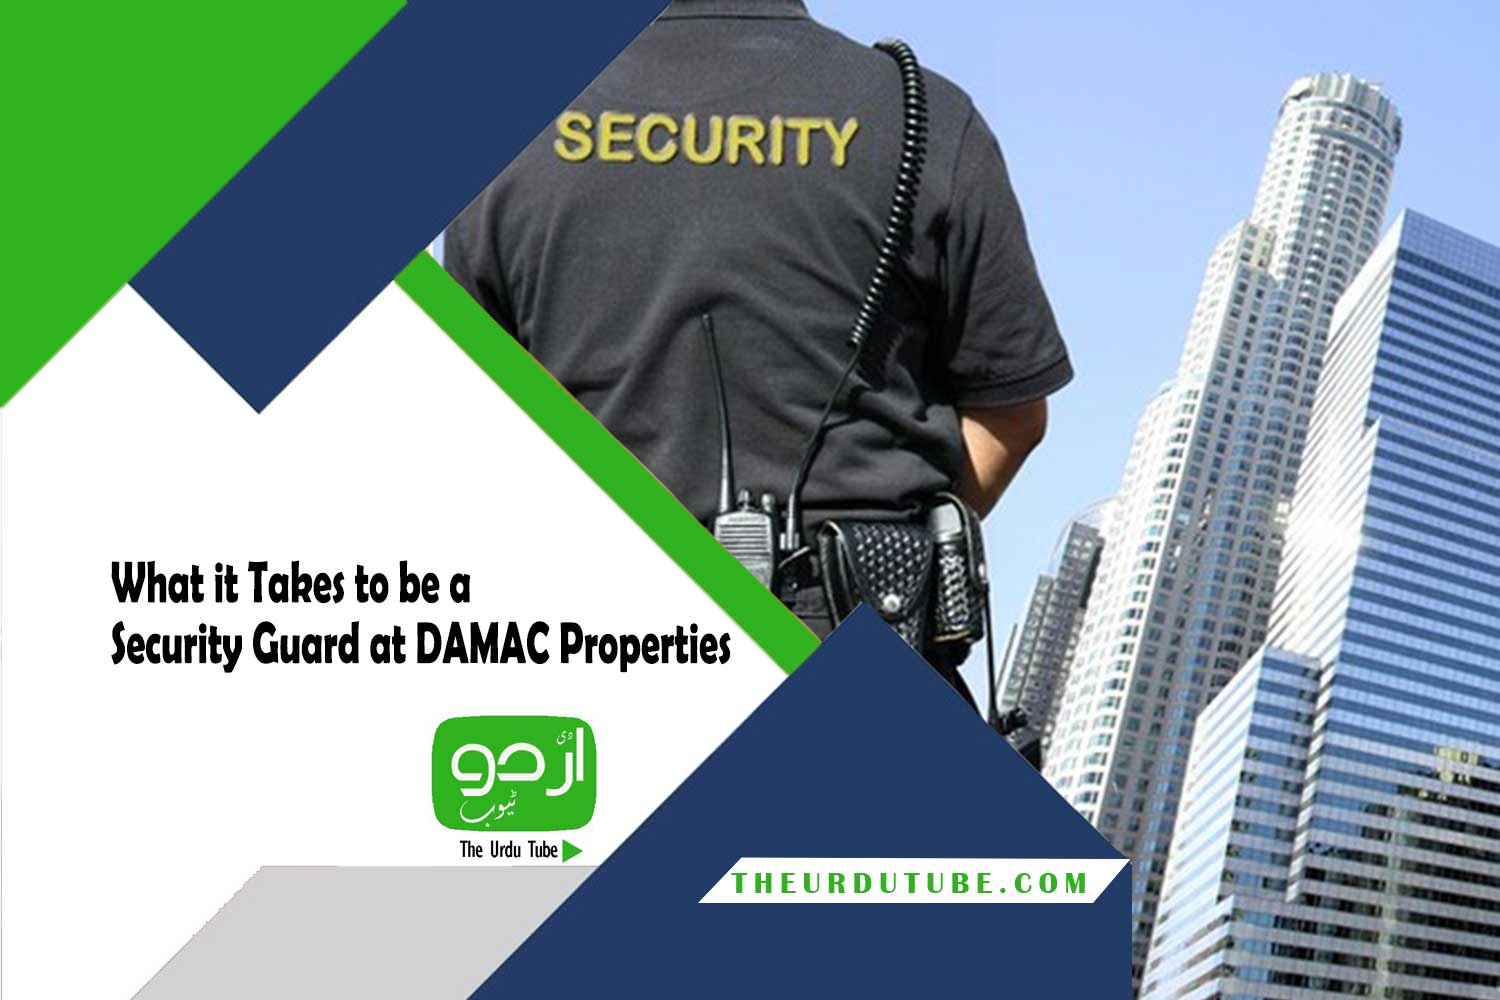 What it Takes to be a Security Guard at DAMAC Properties